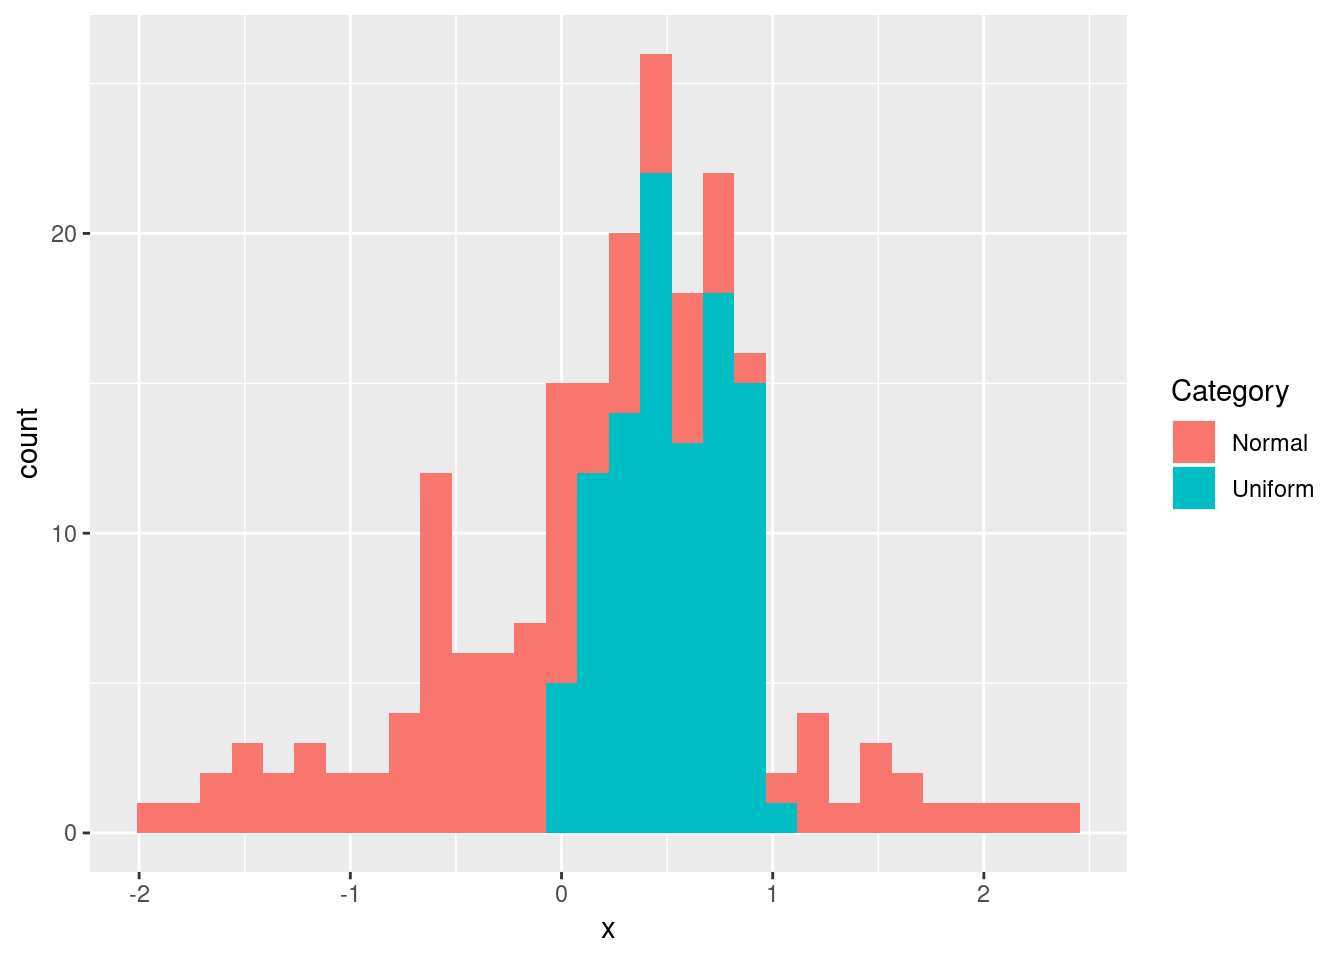 Determining the Distribution of Data Using Histograms